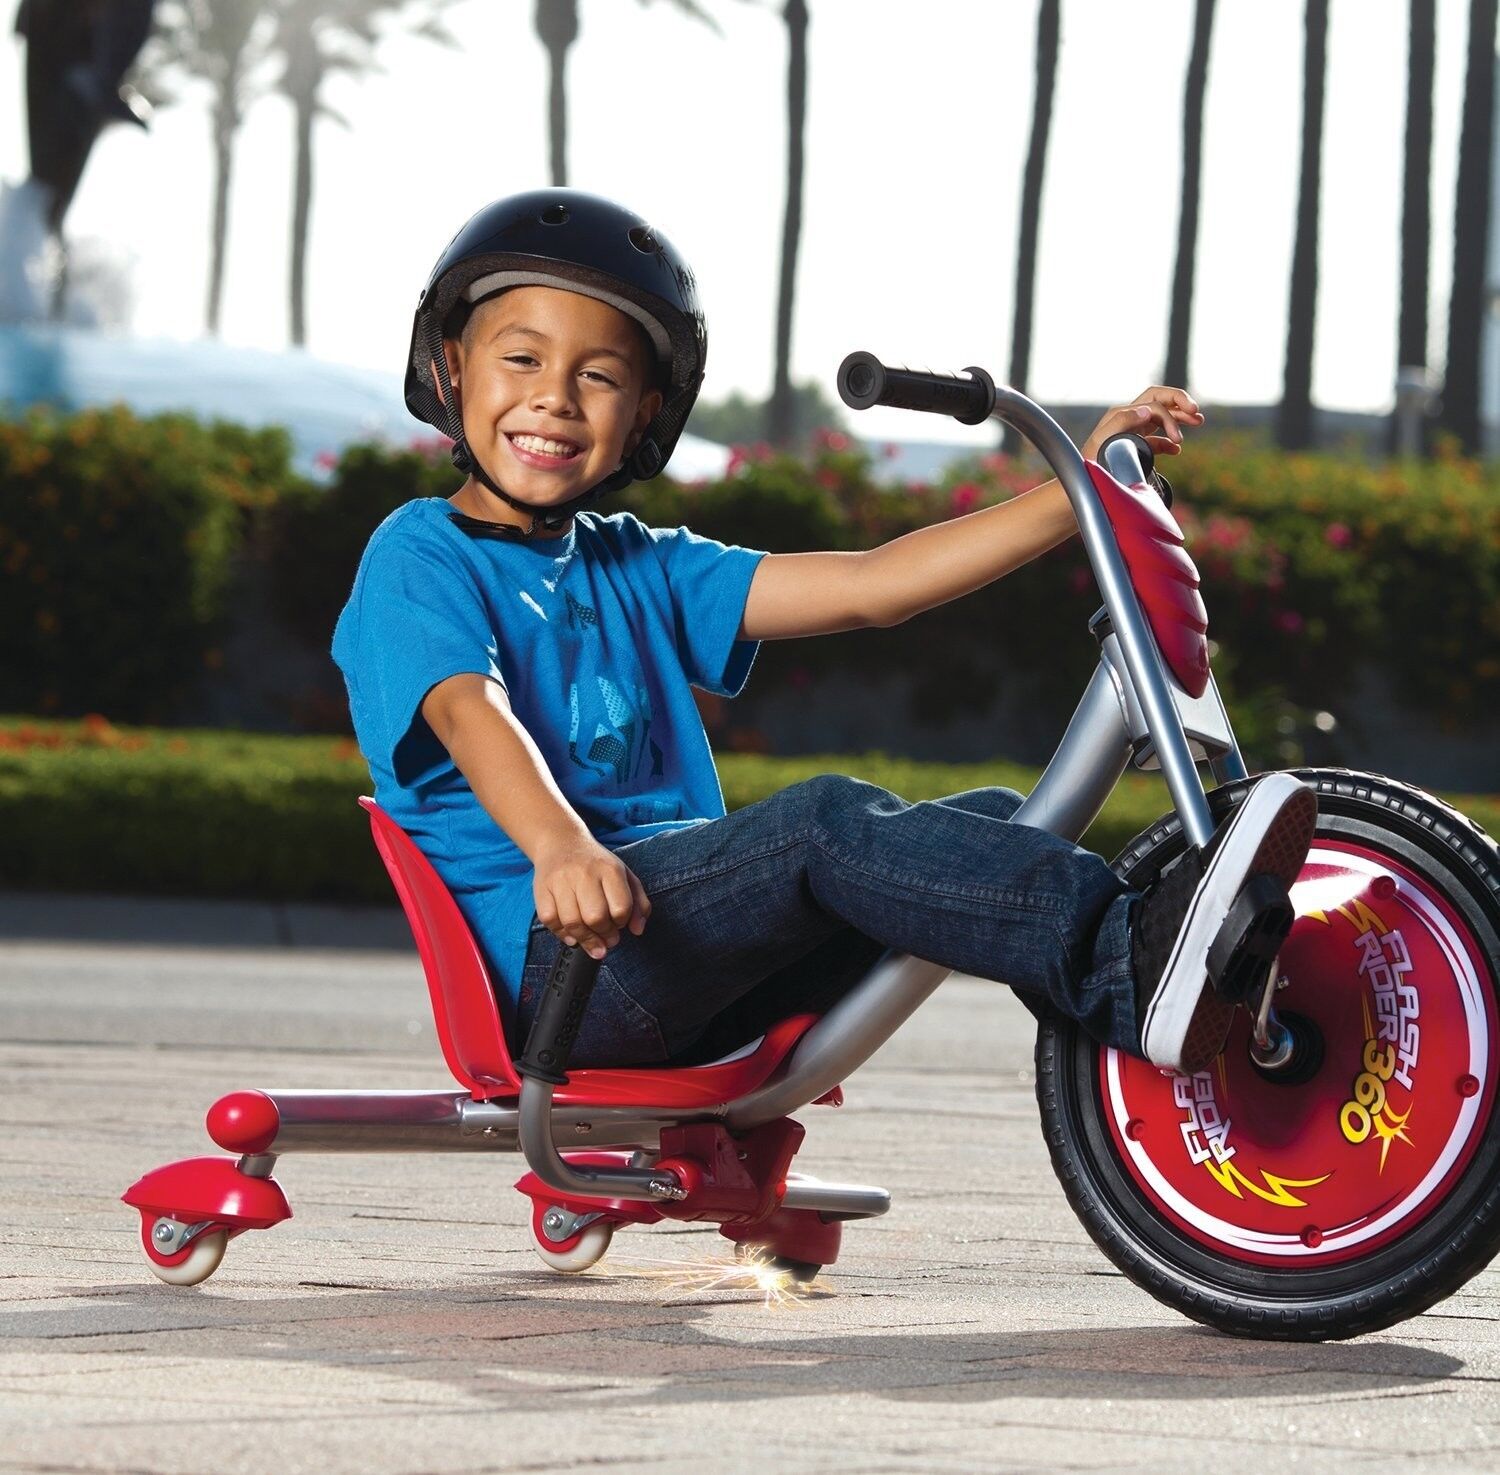 Big Wheel 360 Spin Drift Chopper Tricycle Toy Kids Ride On Pedal Trike Red New